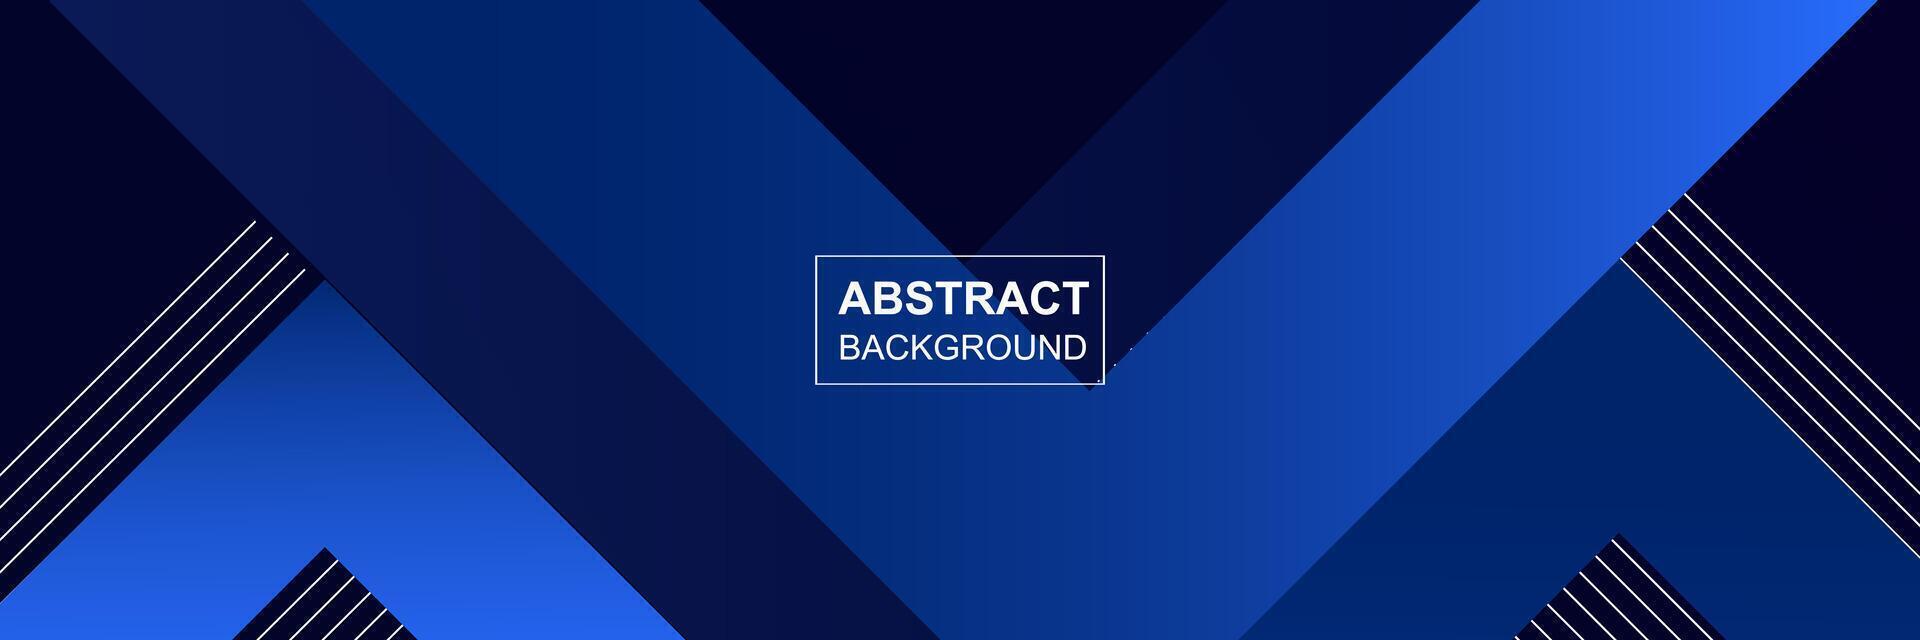 Dark blue abstract background company corporate presentation with shape line banner template vector design